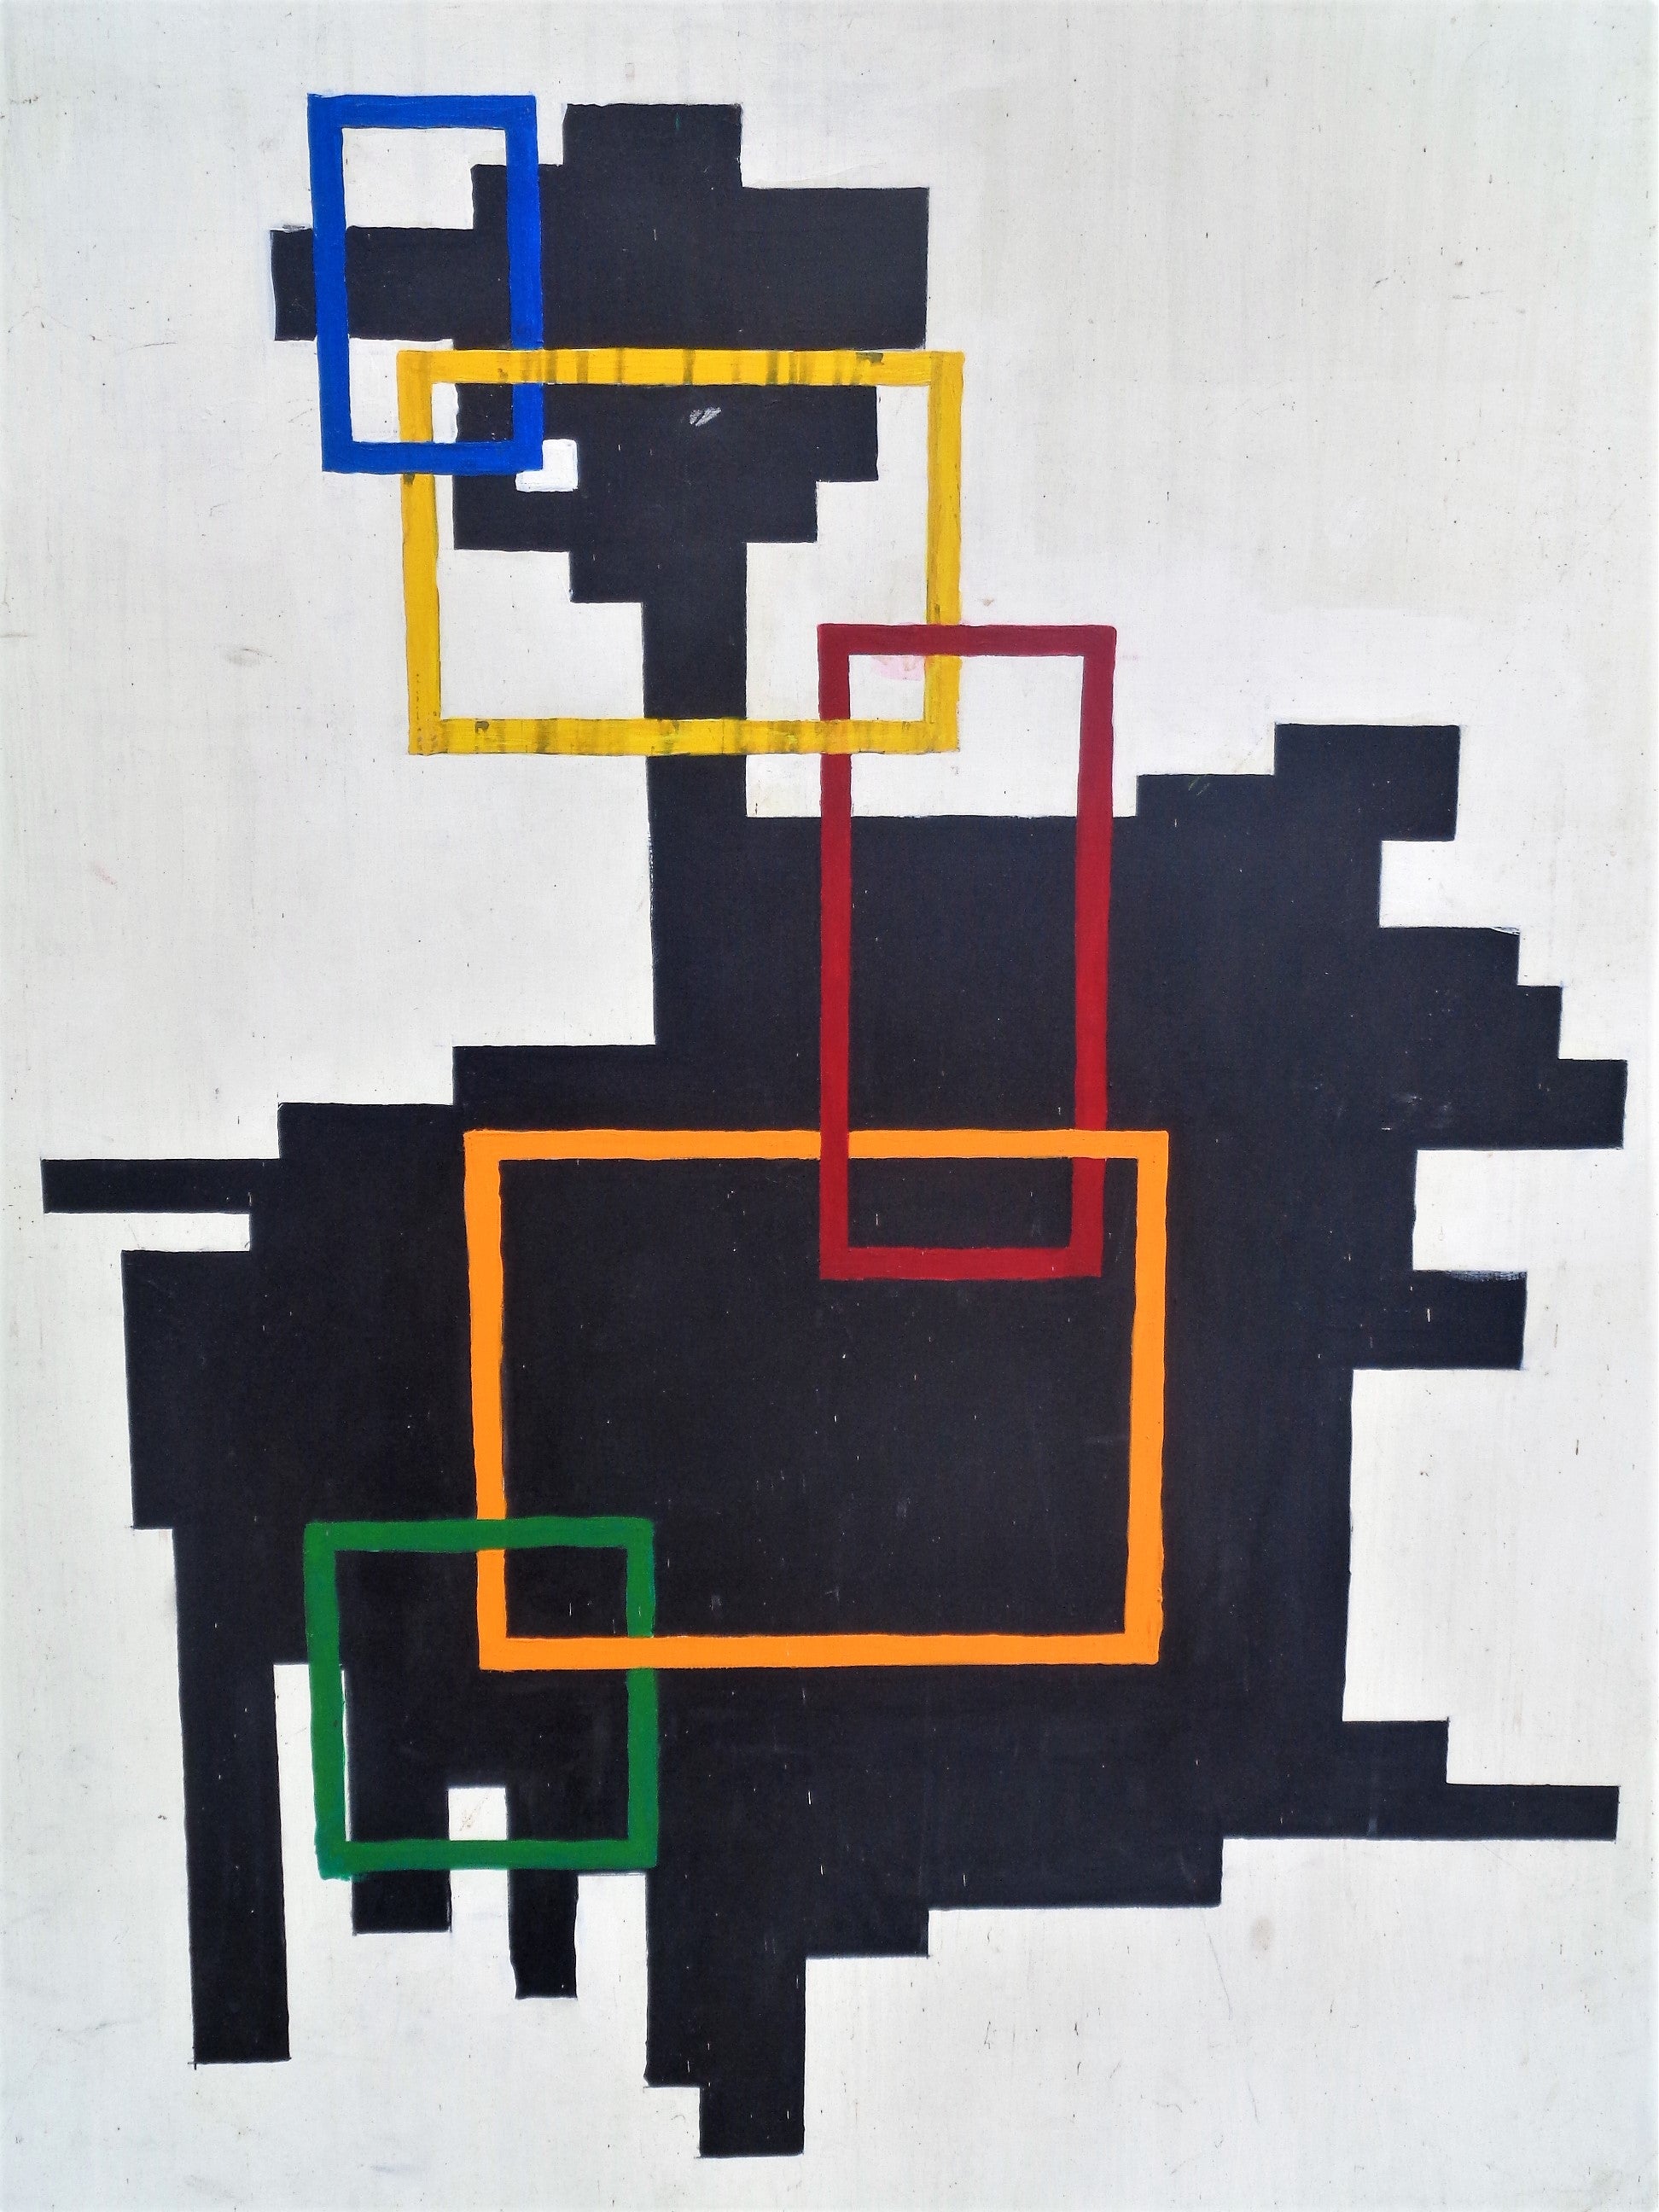 Large decorative geometric abstract painting on masonite board in the style of the De Stijl. Anonymous work, circa 1960. Look at all pictures and read condition report in comment section.